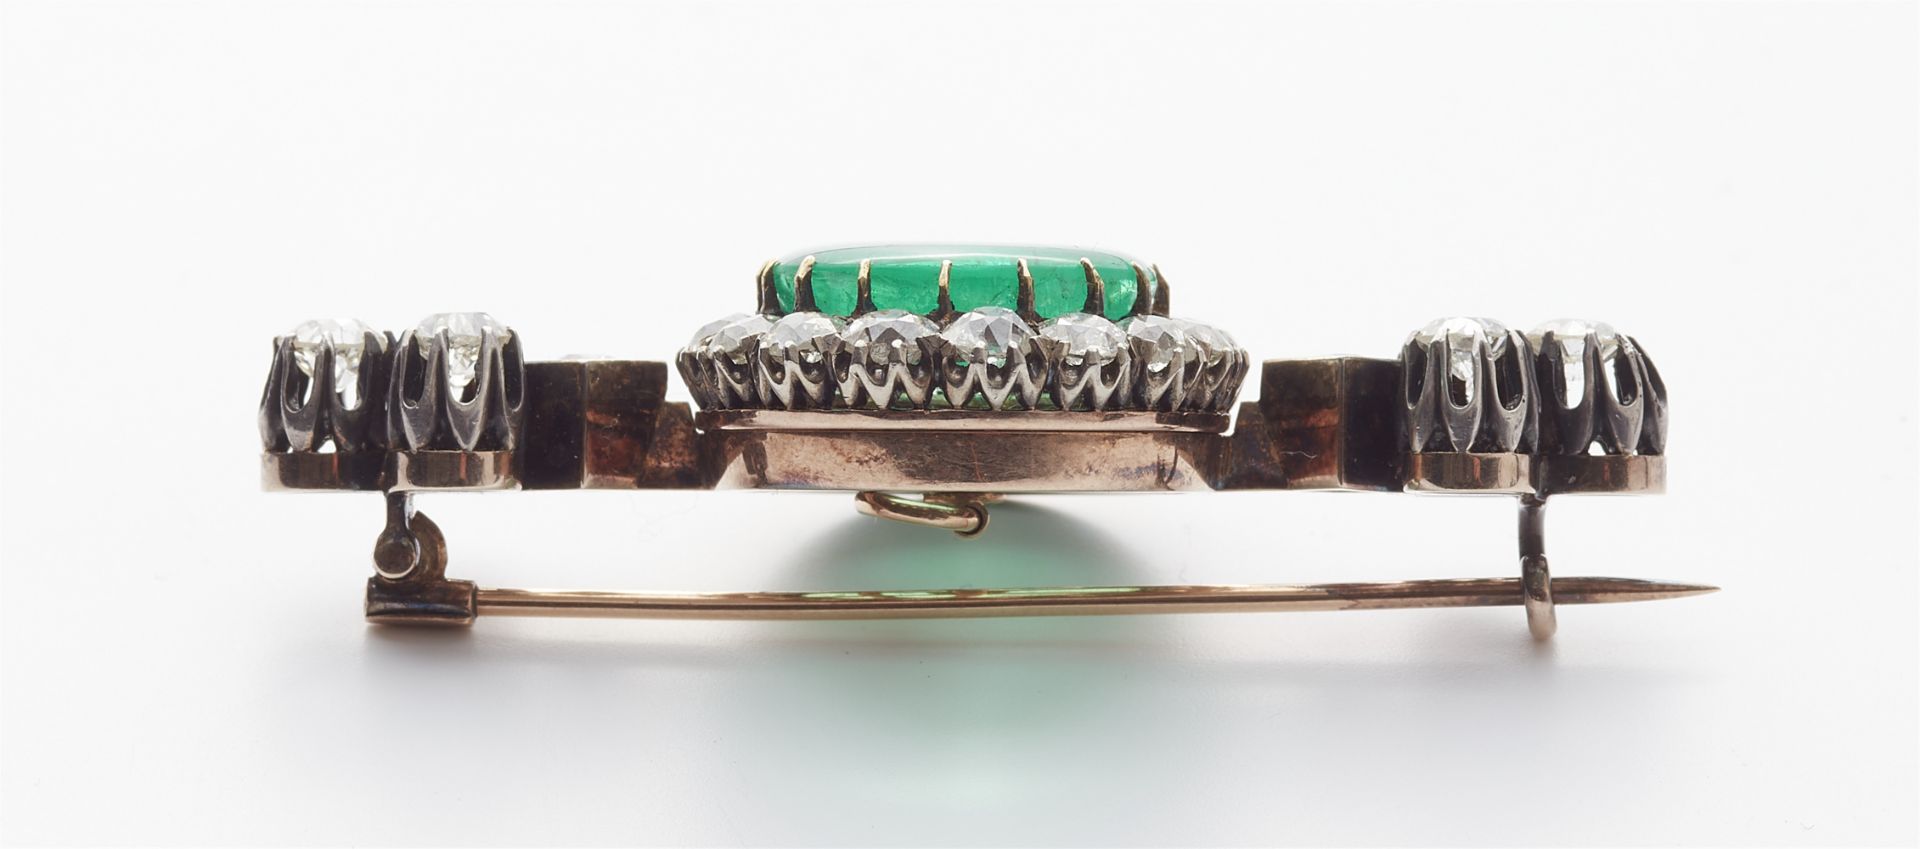 A late 19th century 14k gold and diamond pin brooch with a detachable fine emerald. - Image 3 of 3